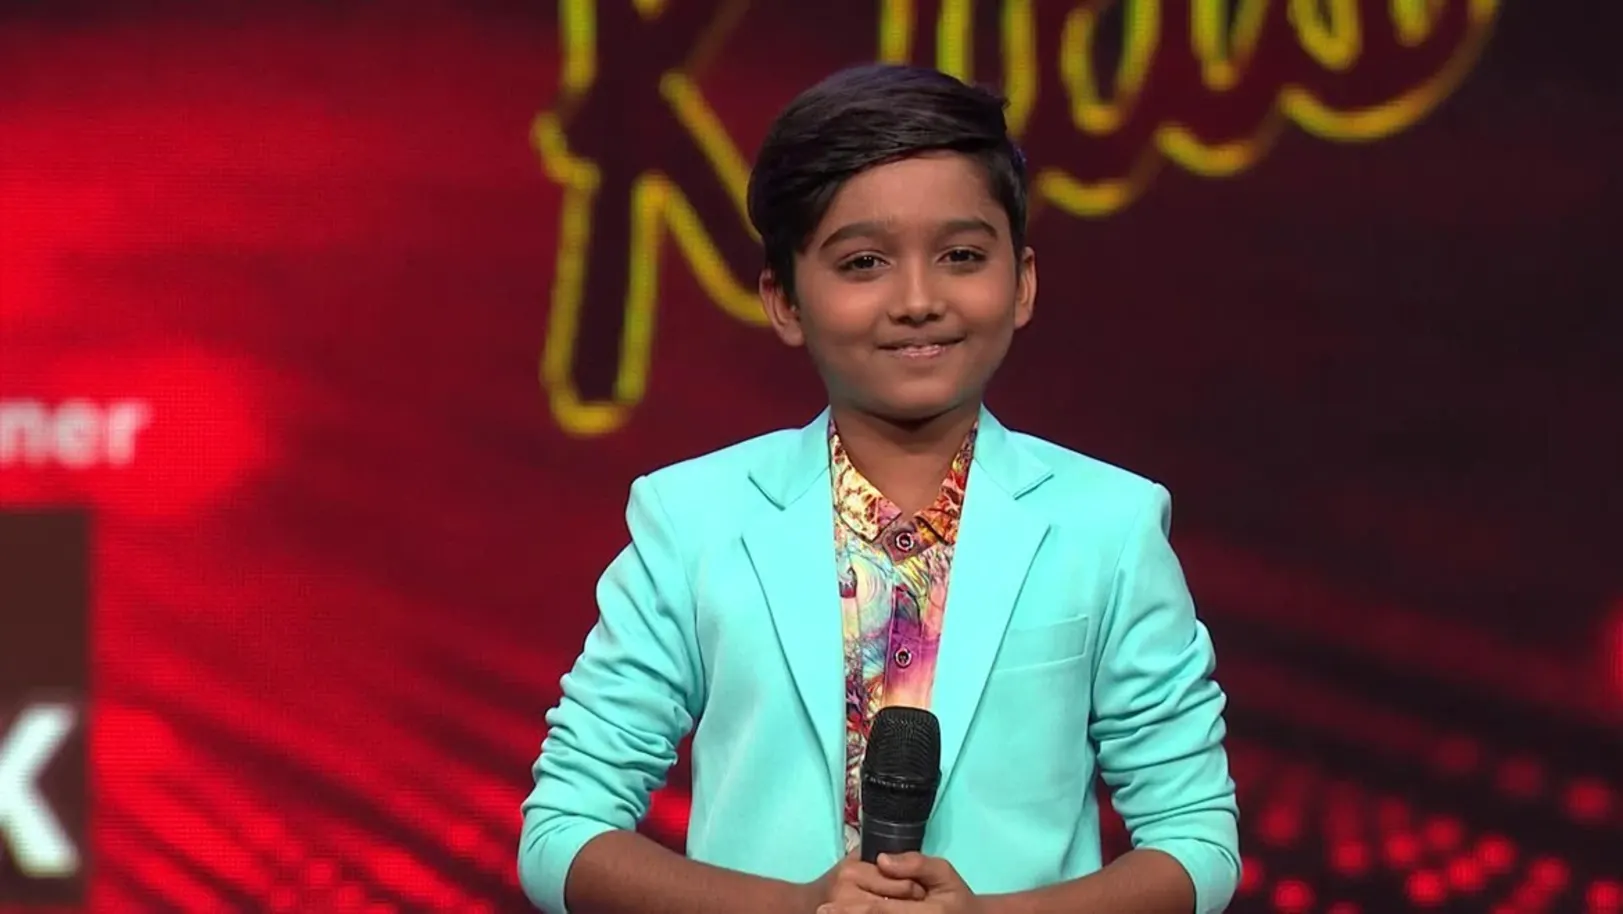 Mohammad Faiz's outstanding performance - Love Me India Kids Highlights 